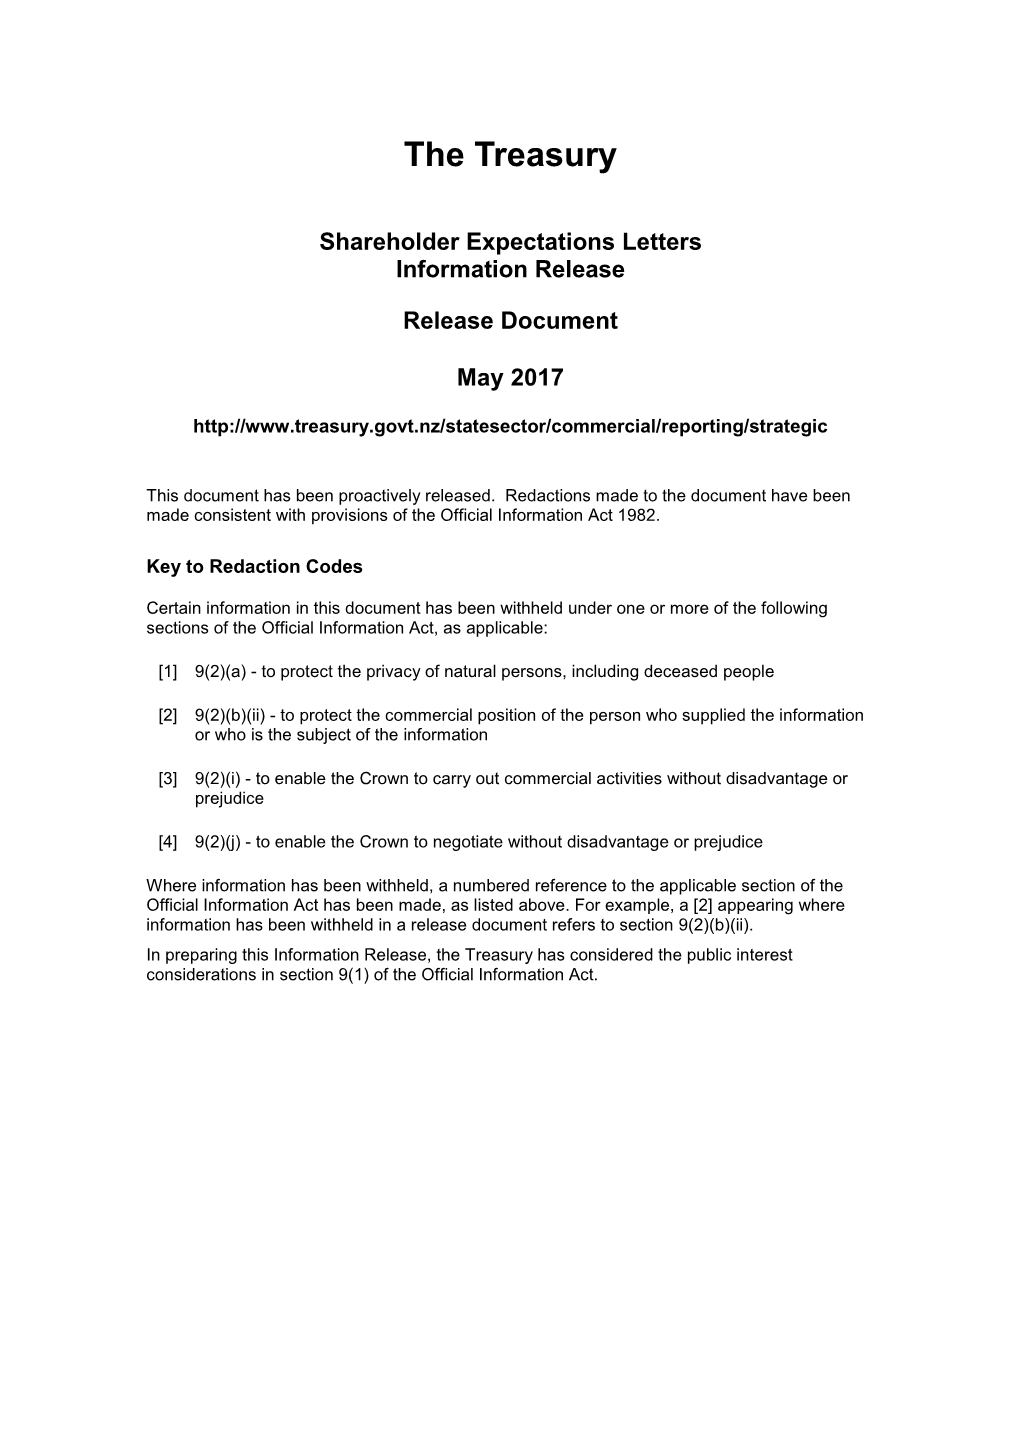 Letter of Expectation 2017/18 from the Shareholding Minister